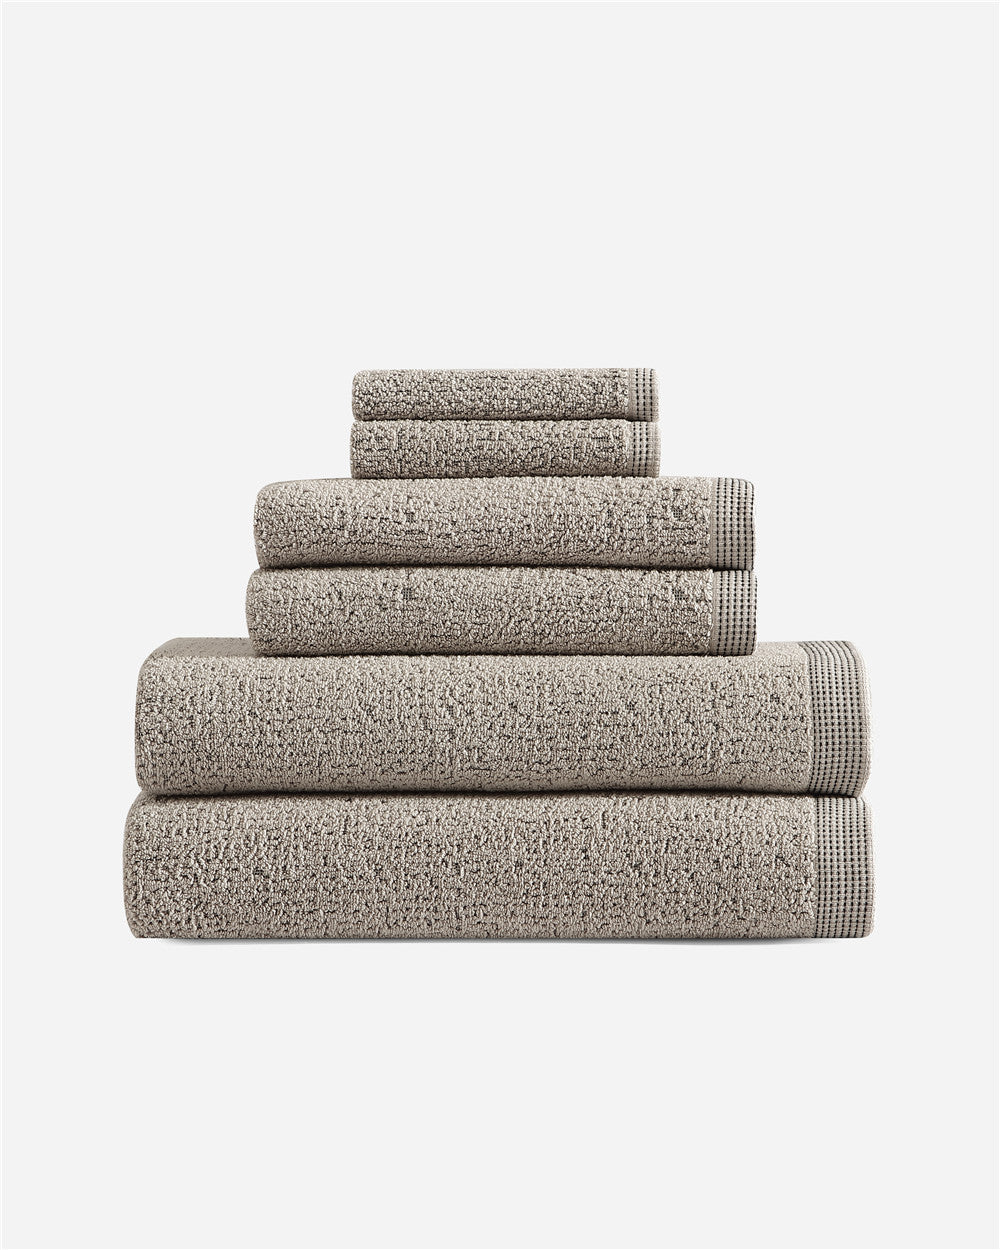 Euro Plush Hotel Towels & WashclothsSee All Colors